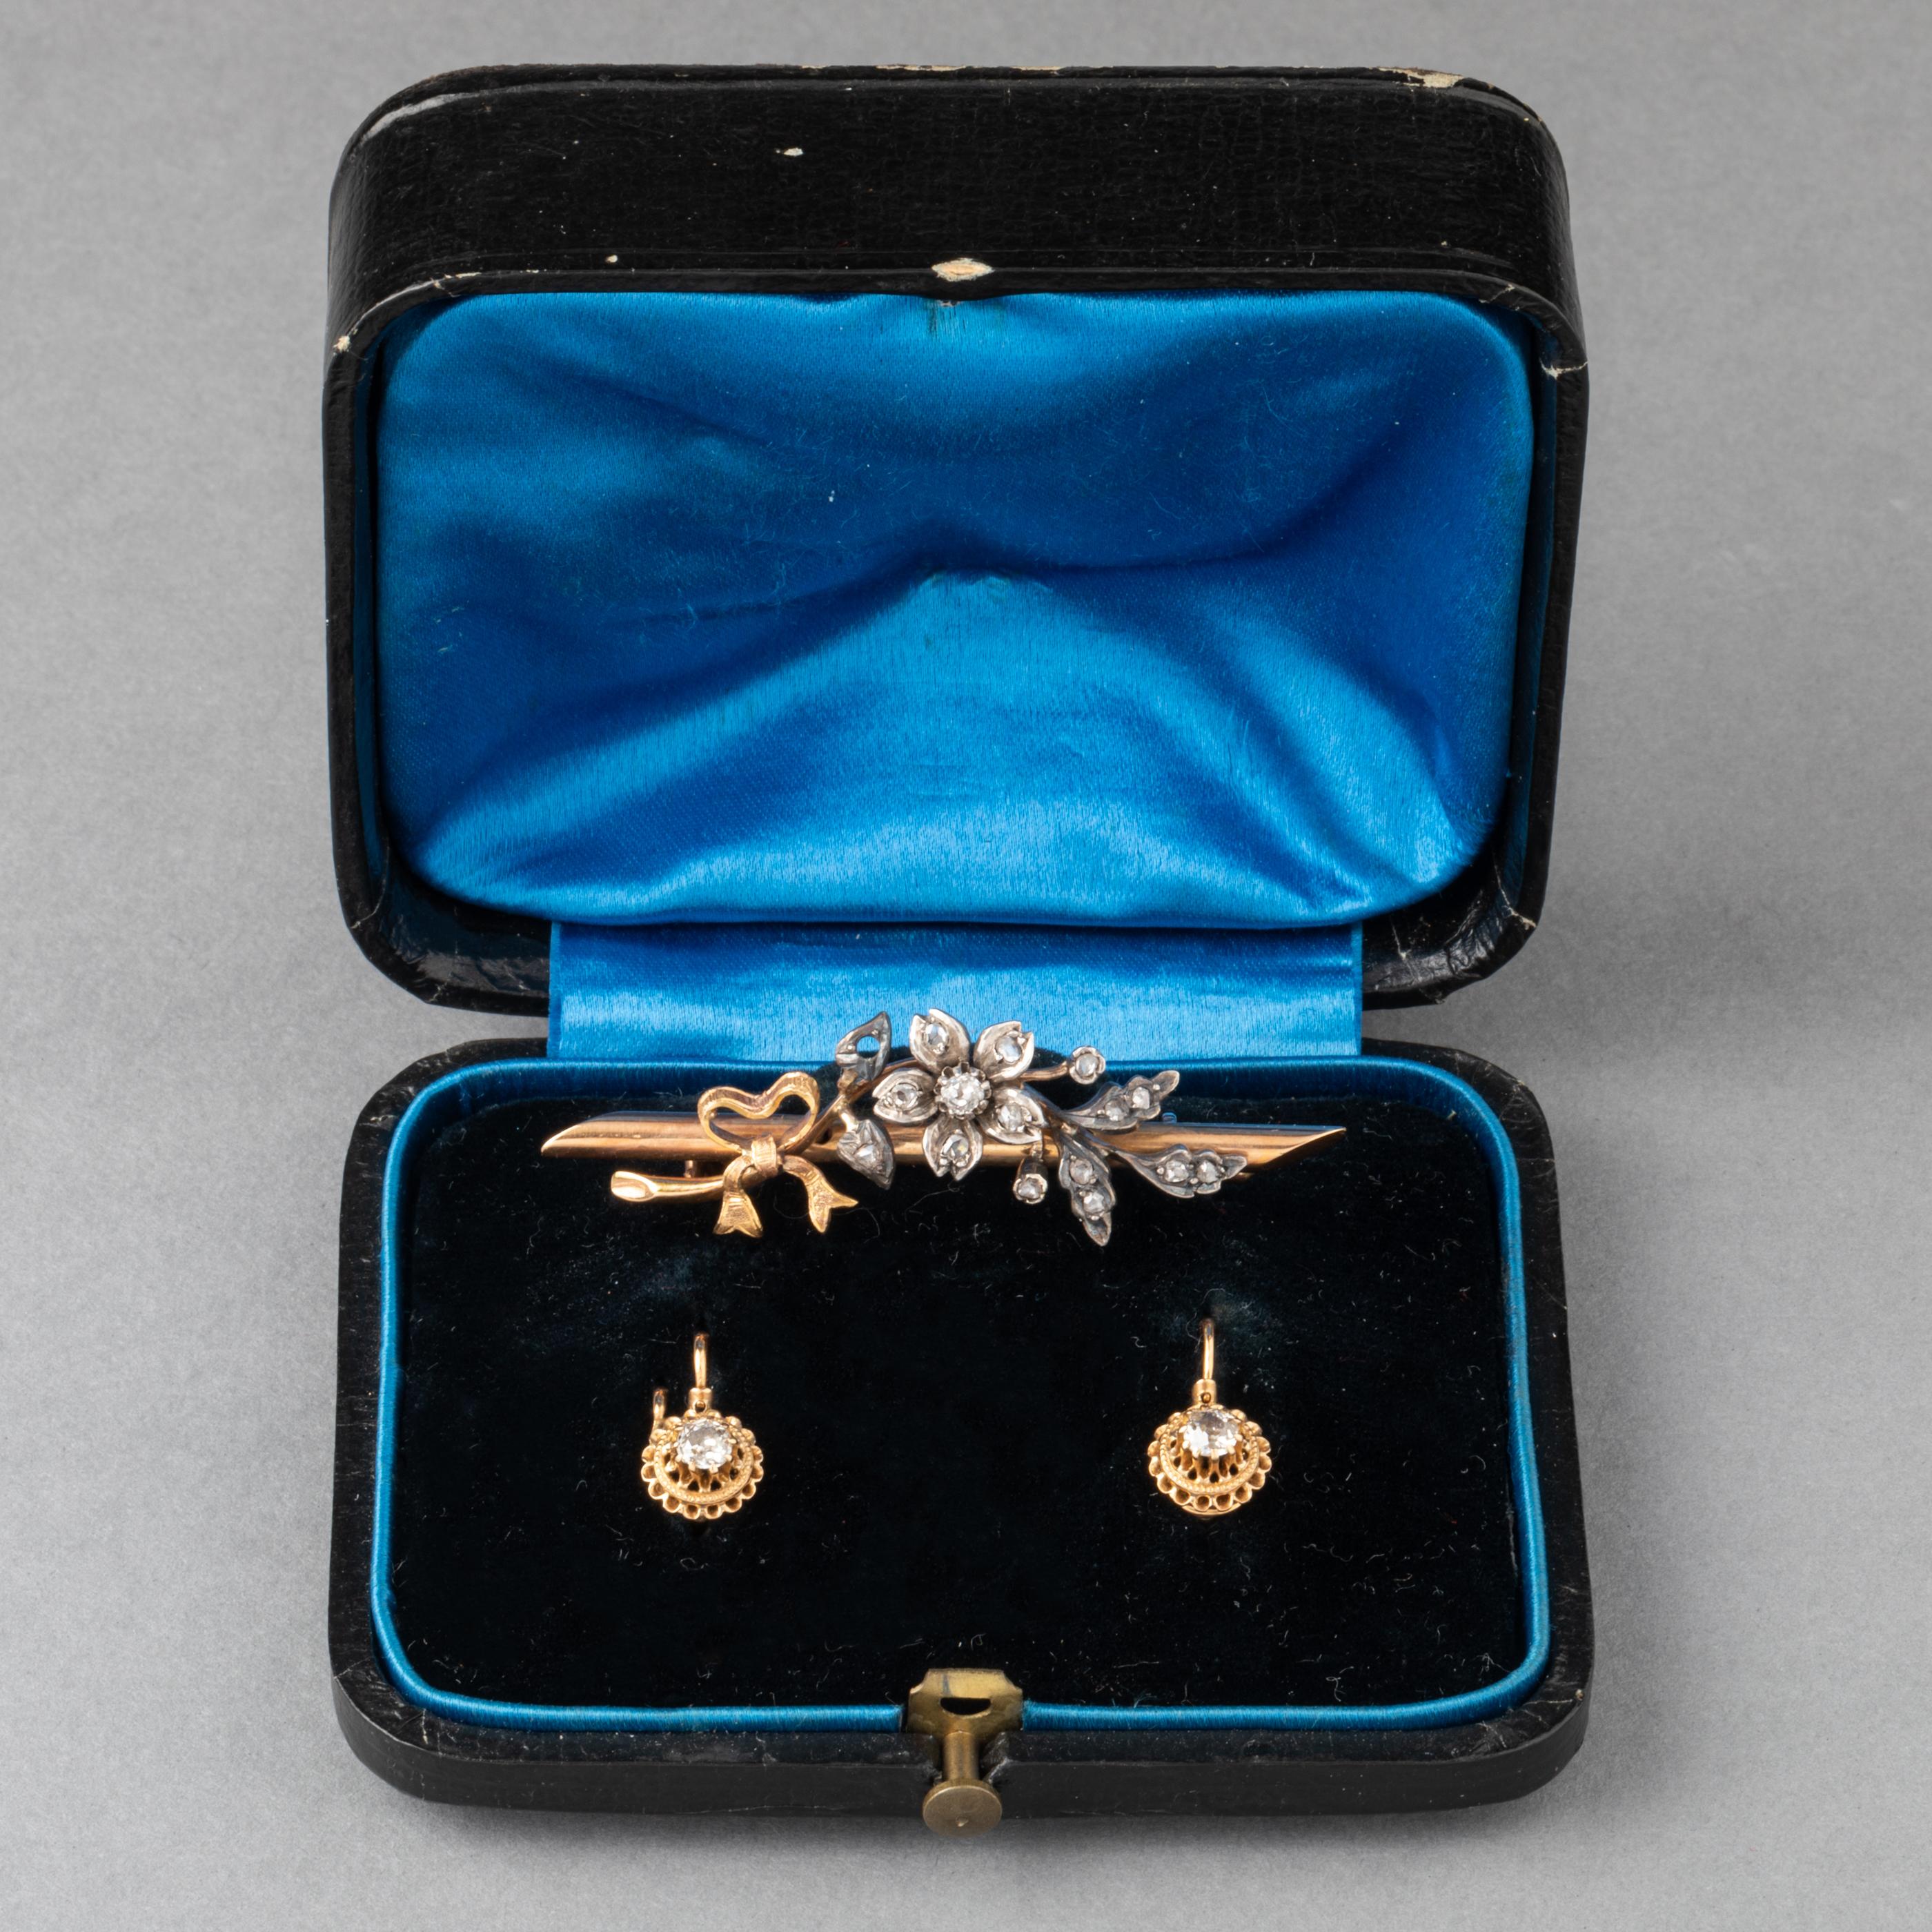 Belle Époque Antique Gold Silver and Diamonds Earrings and Brooch